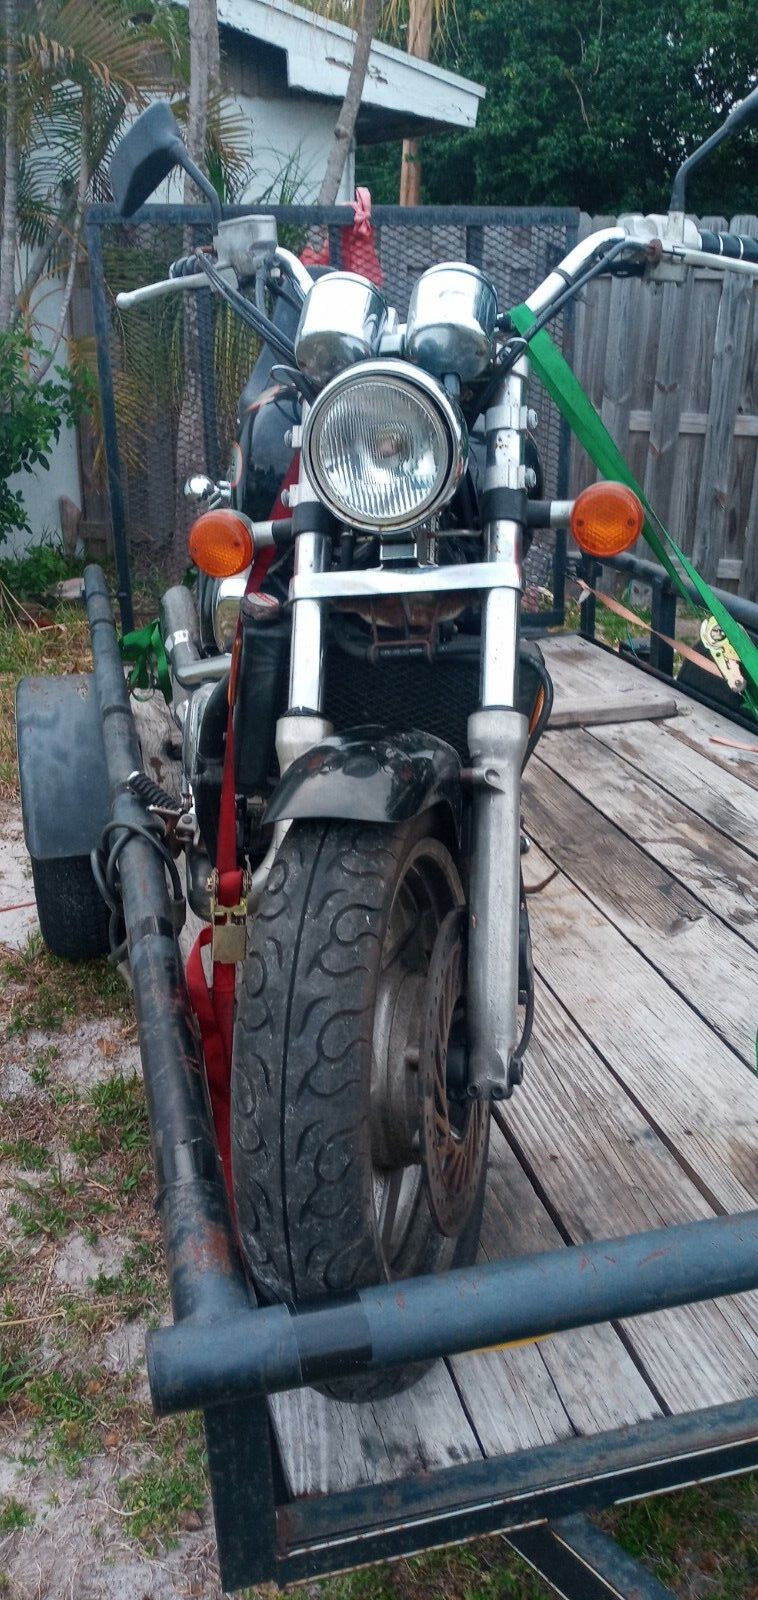 SOLD SOLD 94 - 03 Honda Magna VF 750 VF750 Forks and Triple Trees Straight Triple tree Suspension